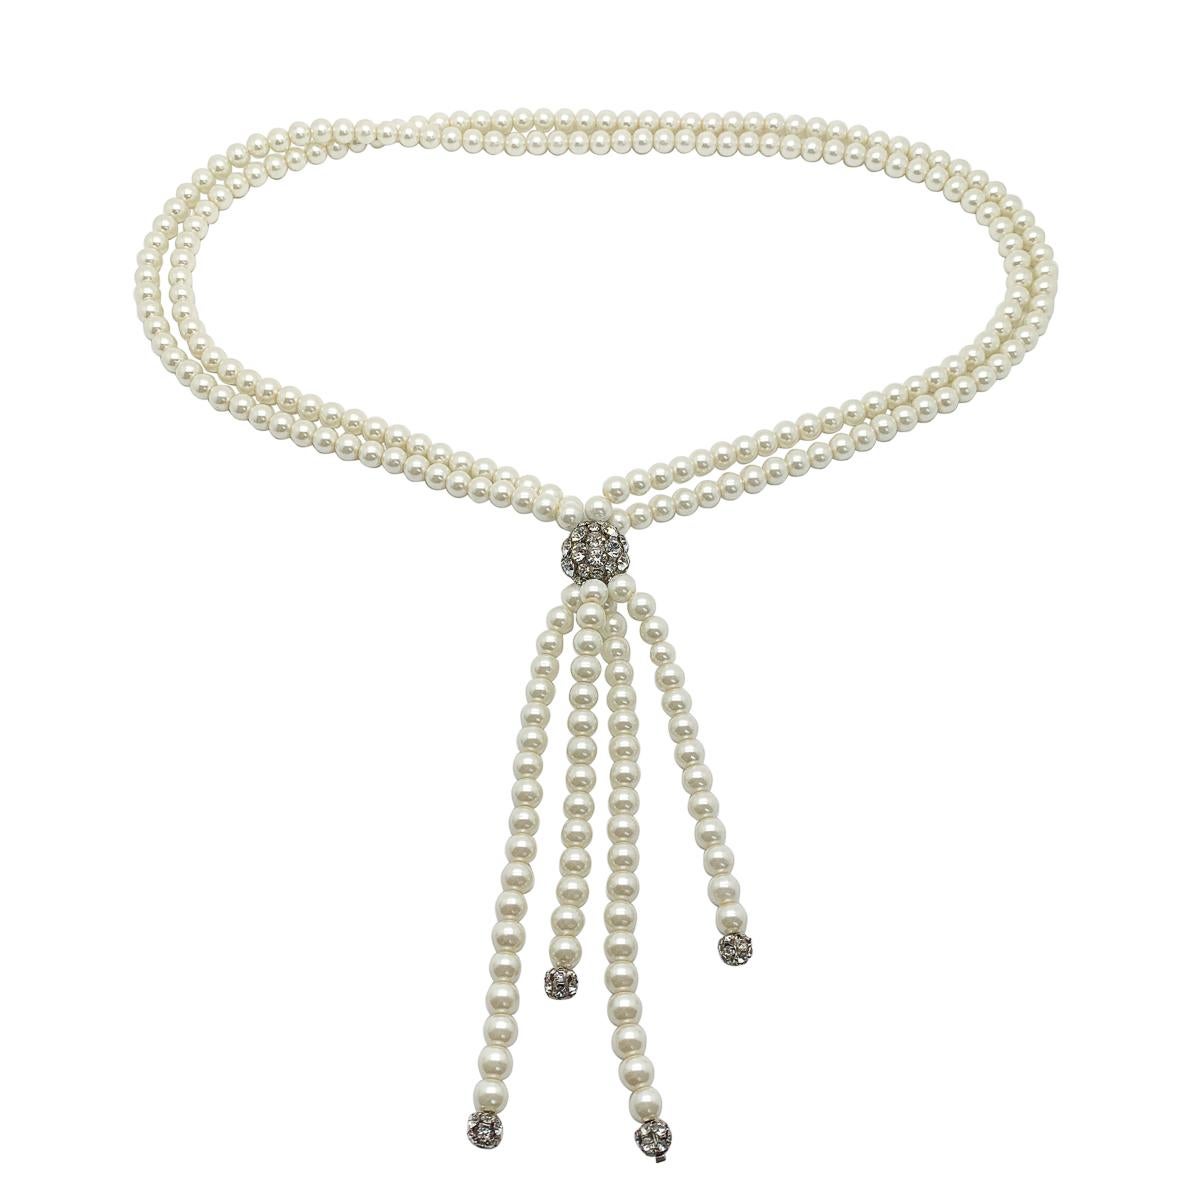 A striking vintage pearl sautoir, long and lustrous.

Vintage Condition: Very good without damage or noteworthy wear.
Materials: Glass pearls, rhinestones, metal
Fastening: None
Approximate Dimensions: 70cm and 16cm tassel
Hailing the classics, this